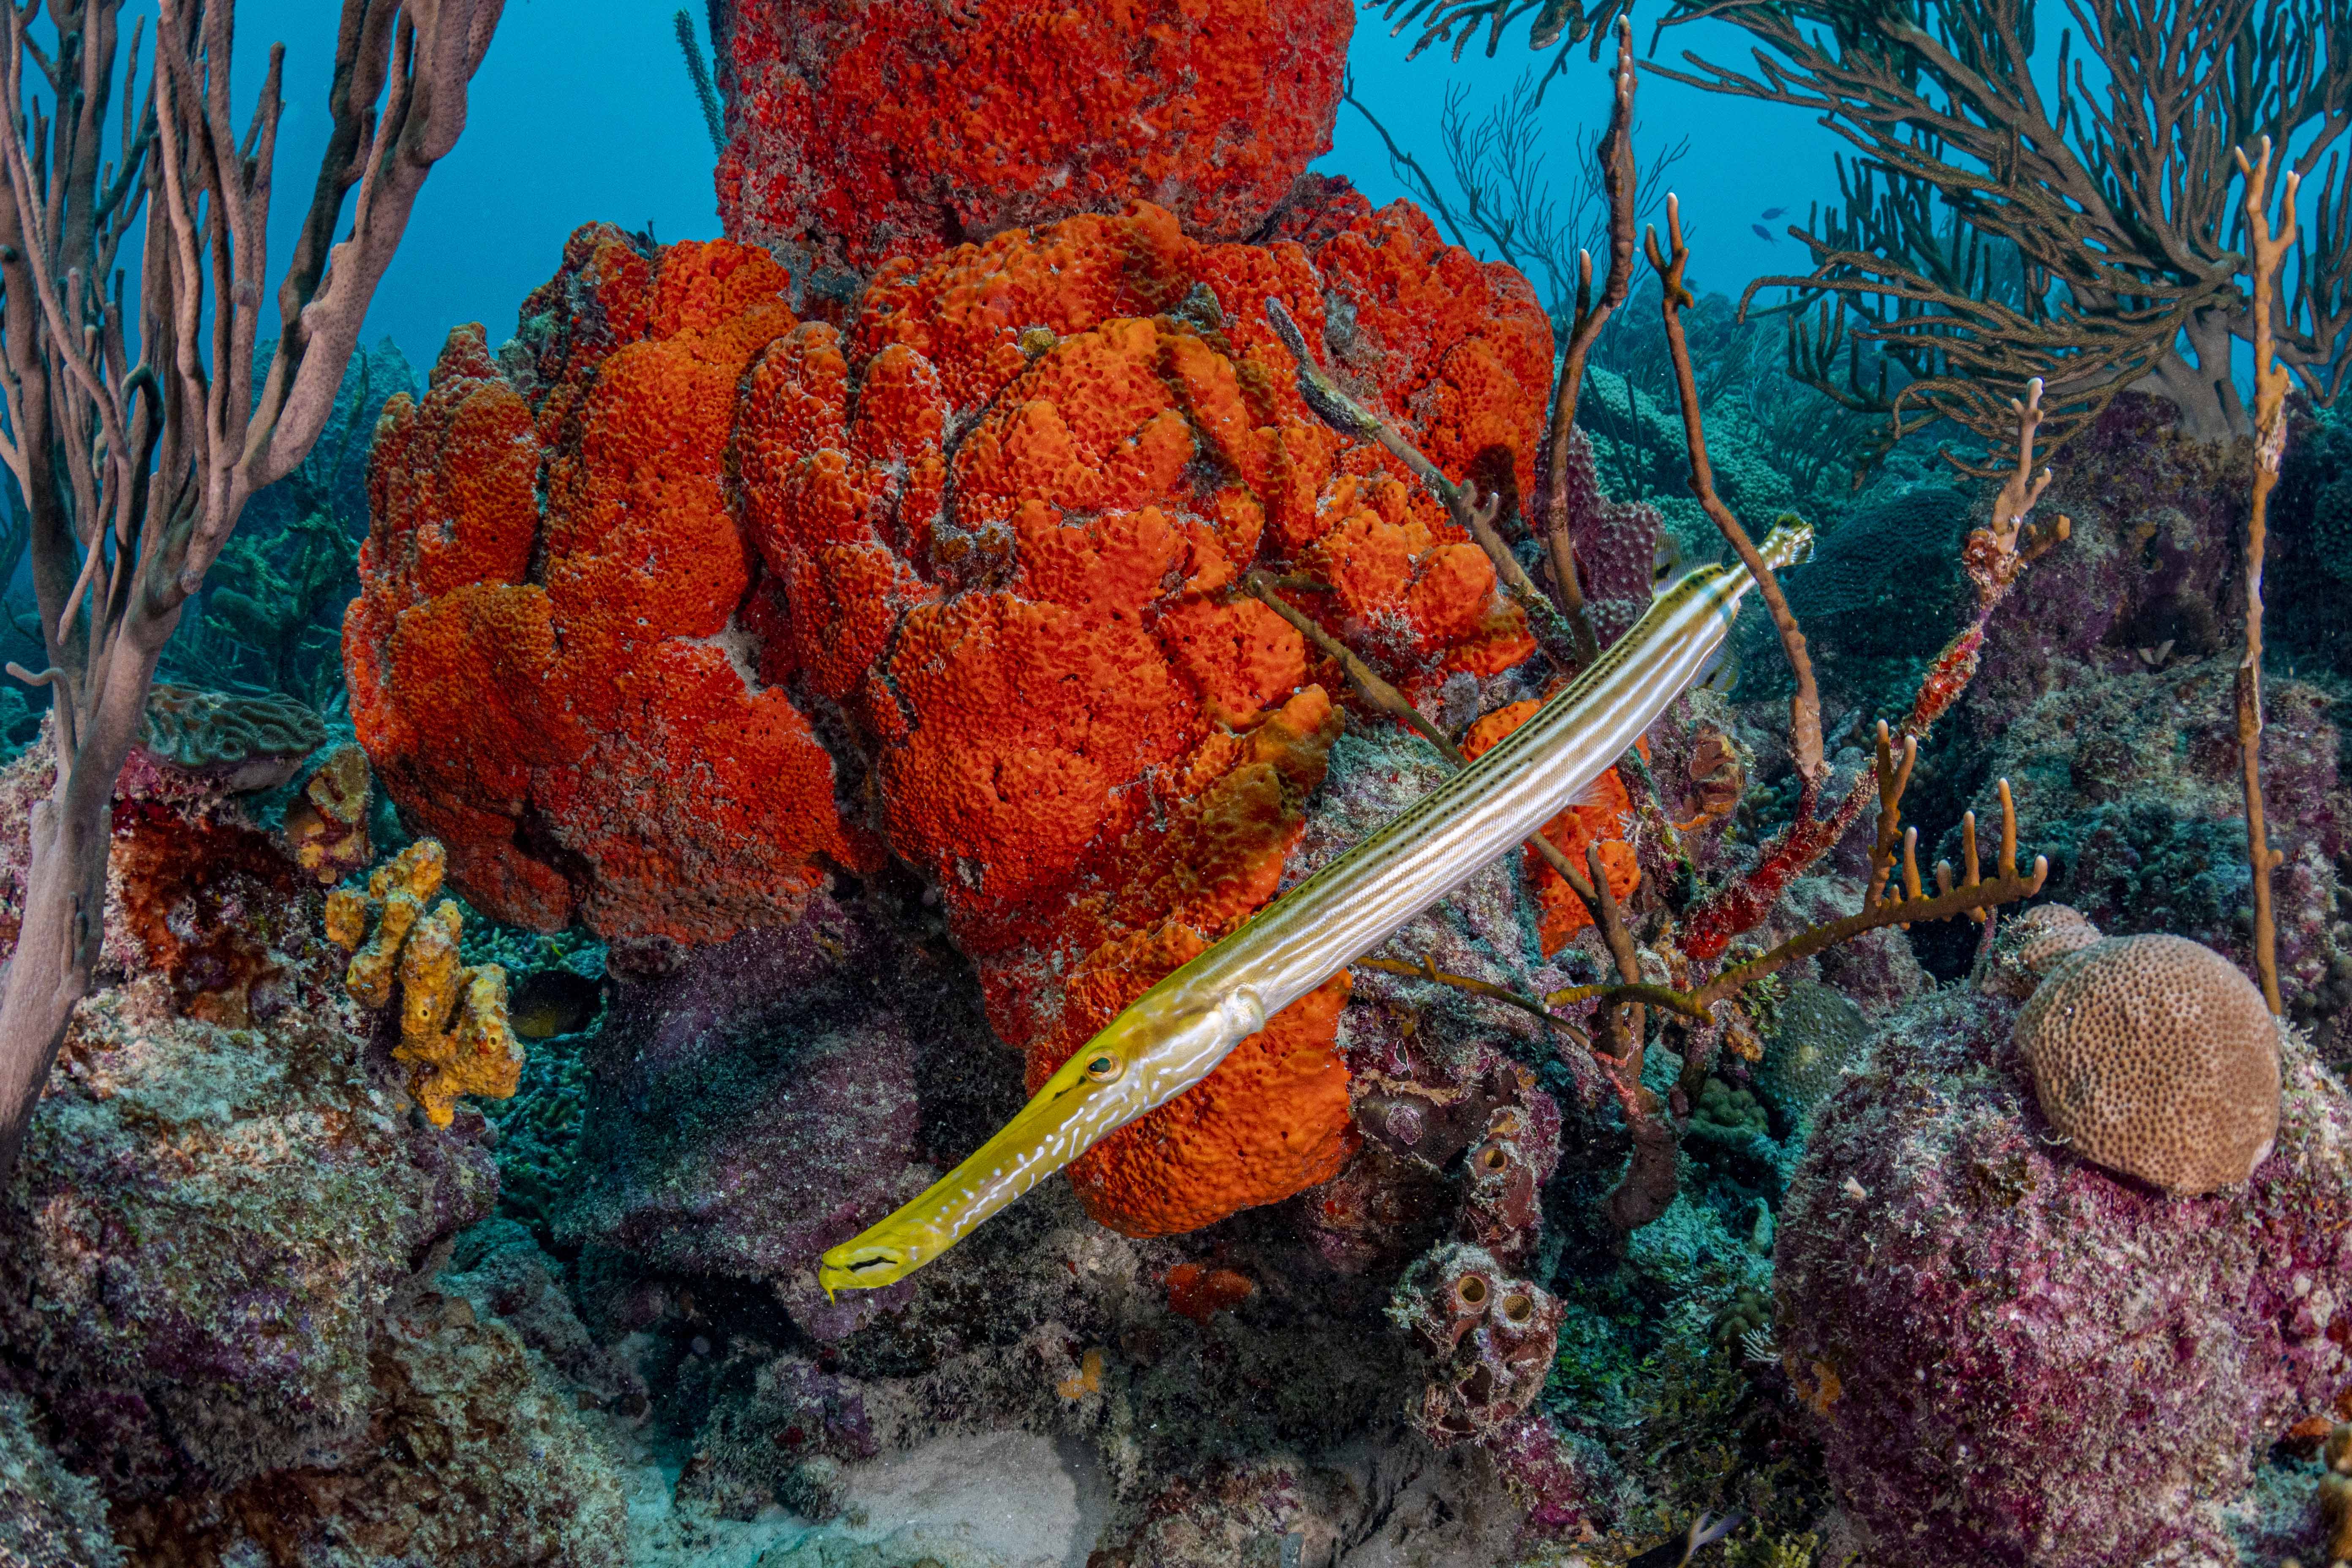 Underwater photo of a long trumpet fish swimming among 